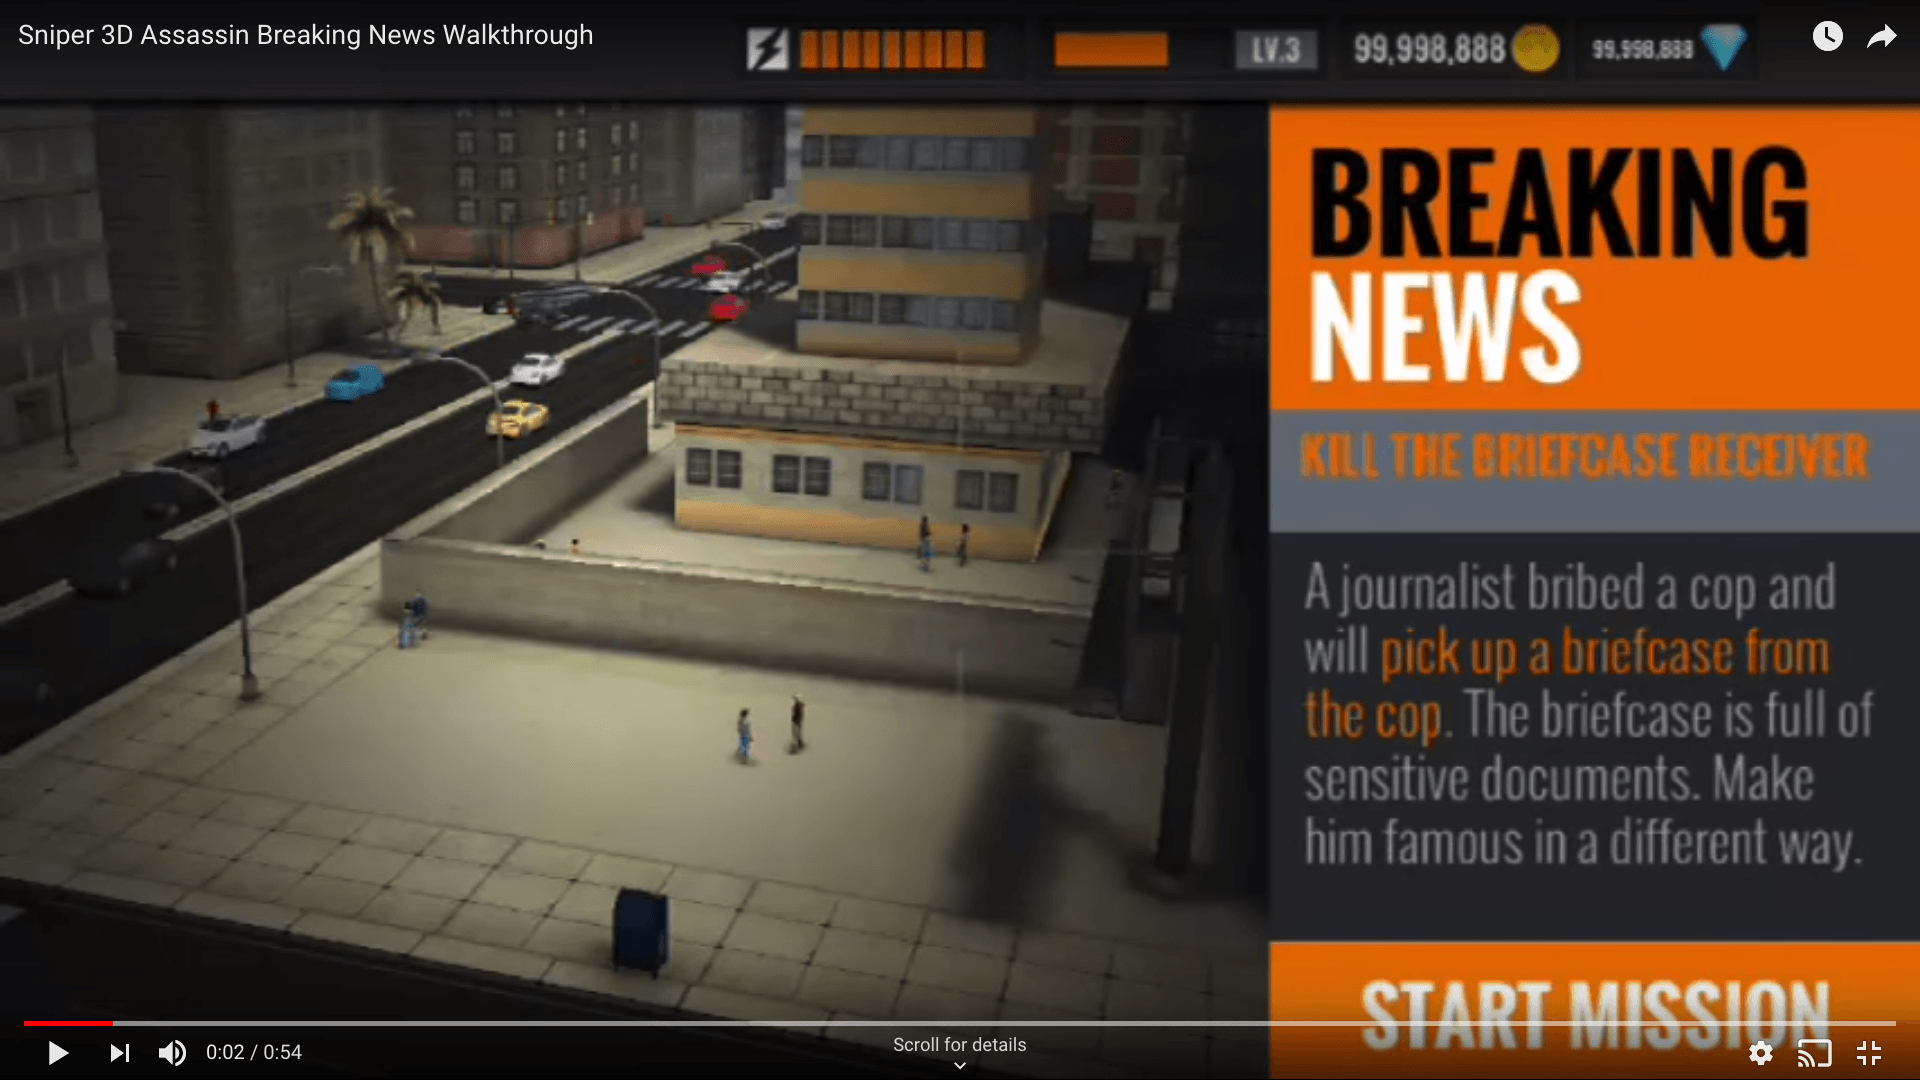 Shooting journalists in a video game seemed fun, but the game maker has had a change of heart